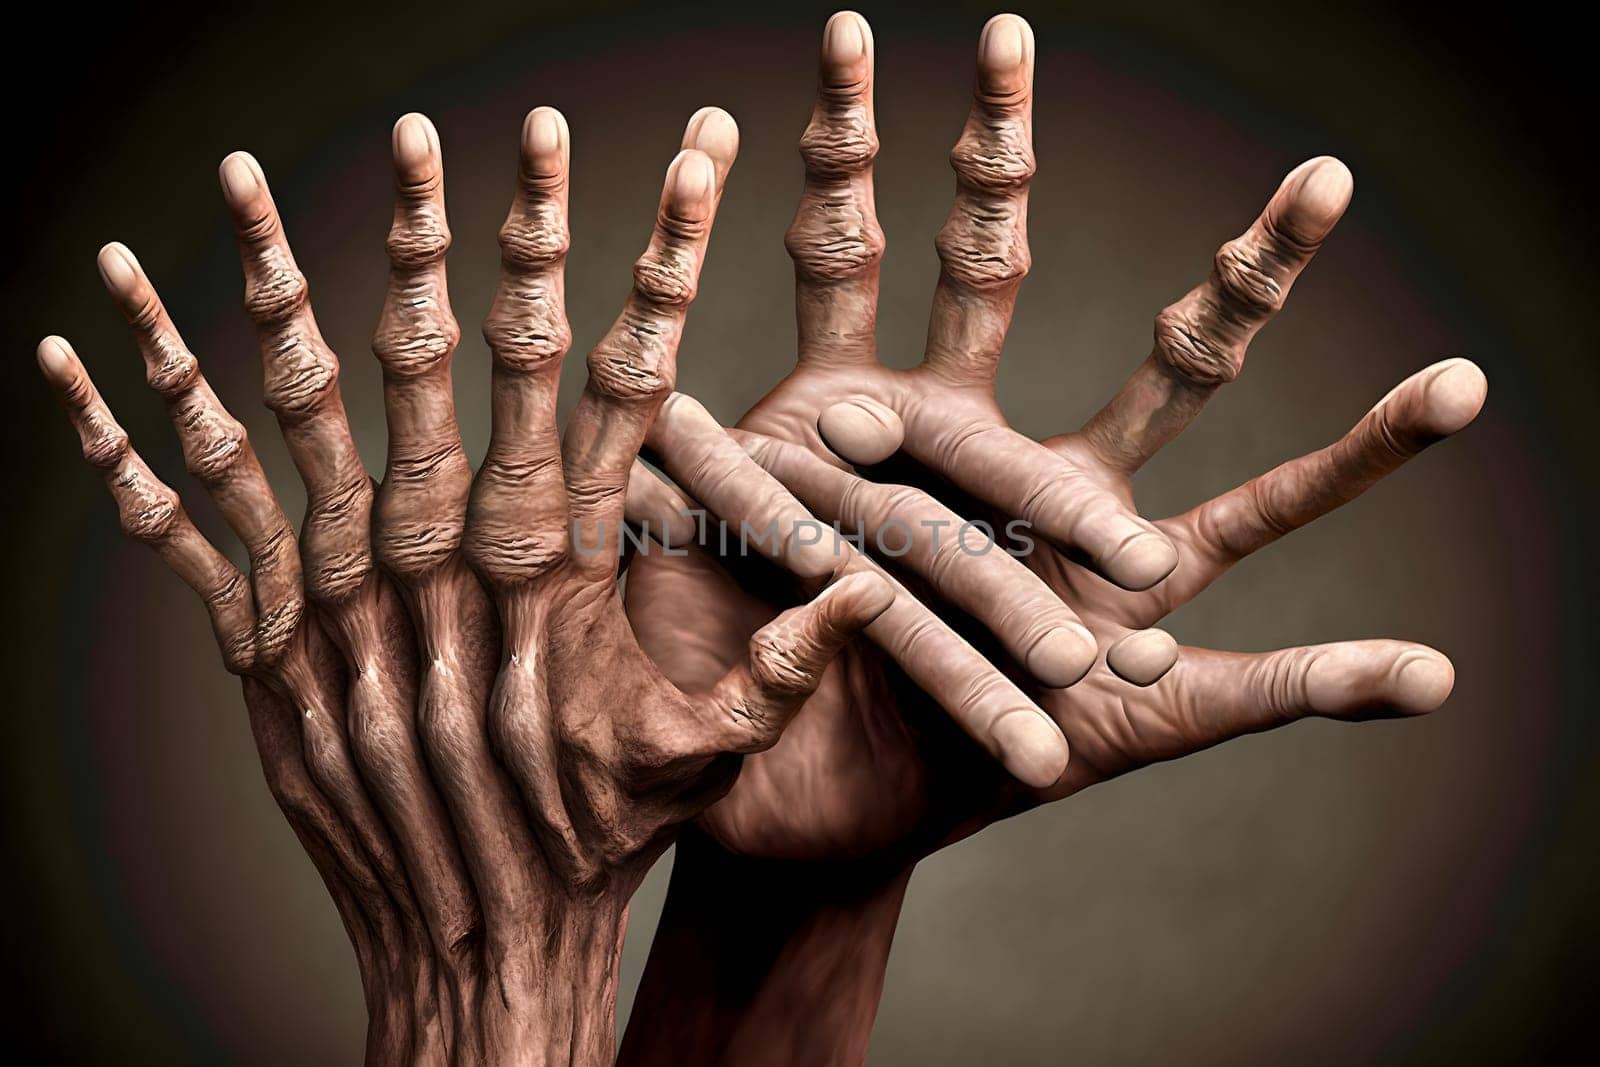 mutant caucasian human hand with abnormal amount of fingers, neural network generated art. Digitally generated image. Not based on any actual person, scene or pattern.